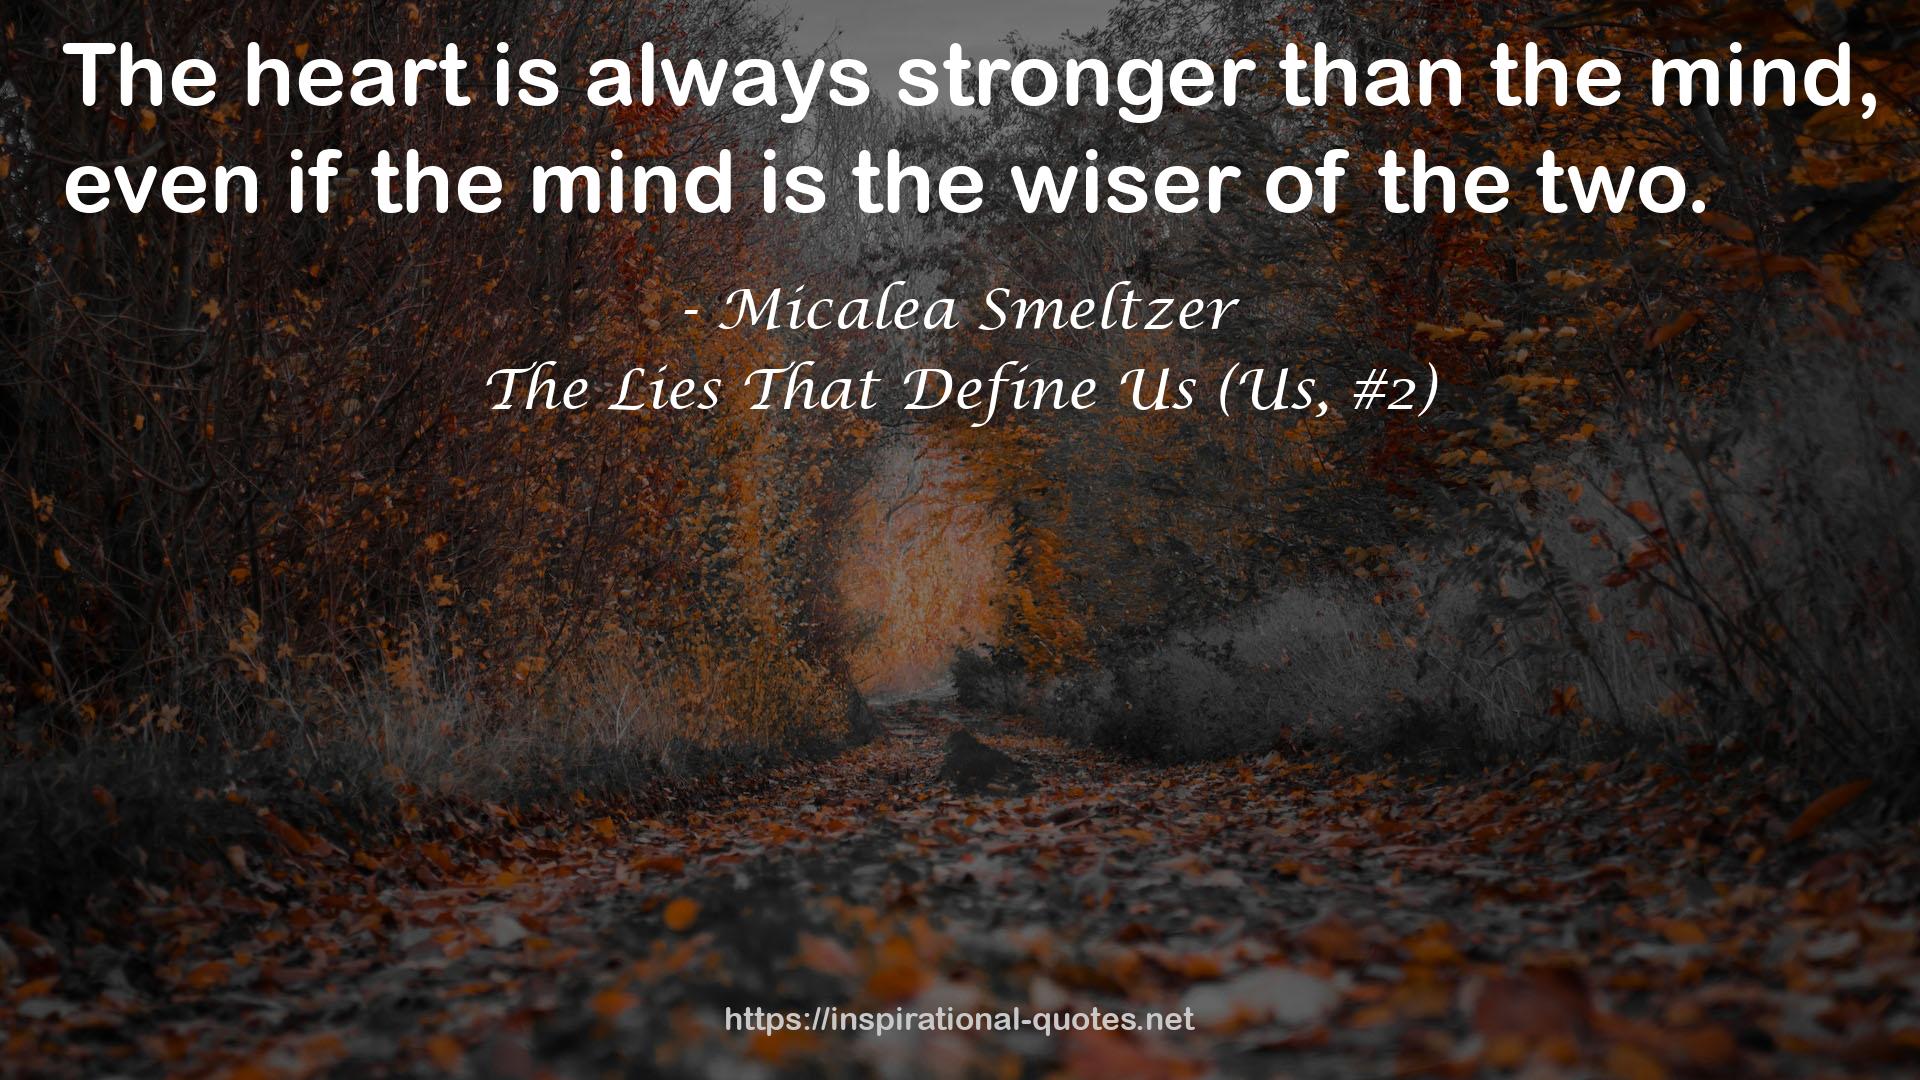 The Lies That Define Us (Us, #2) QUOTES